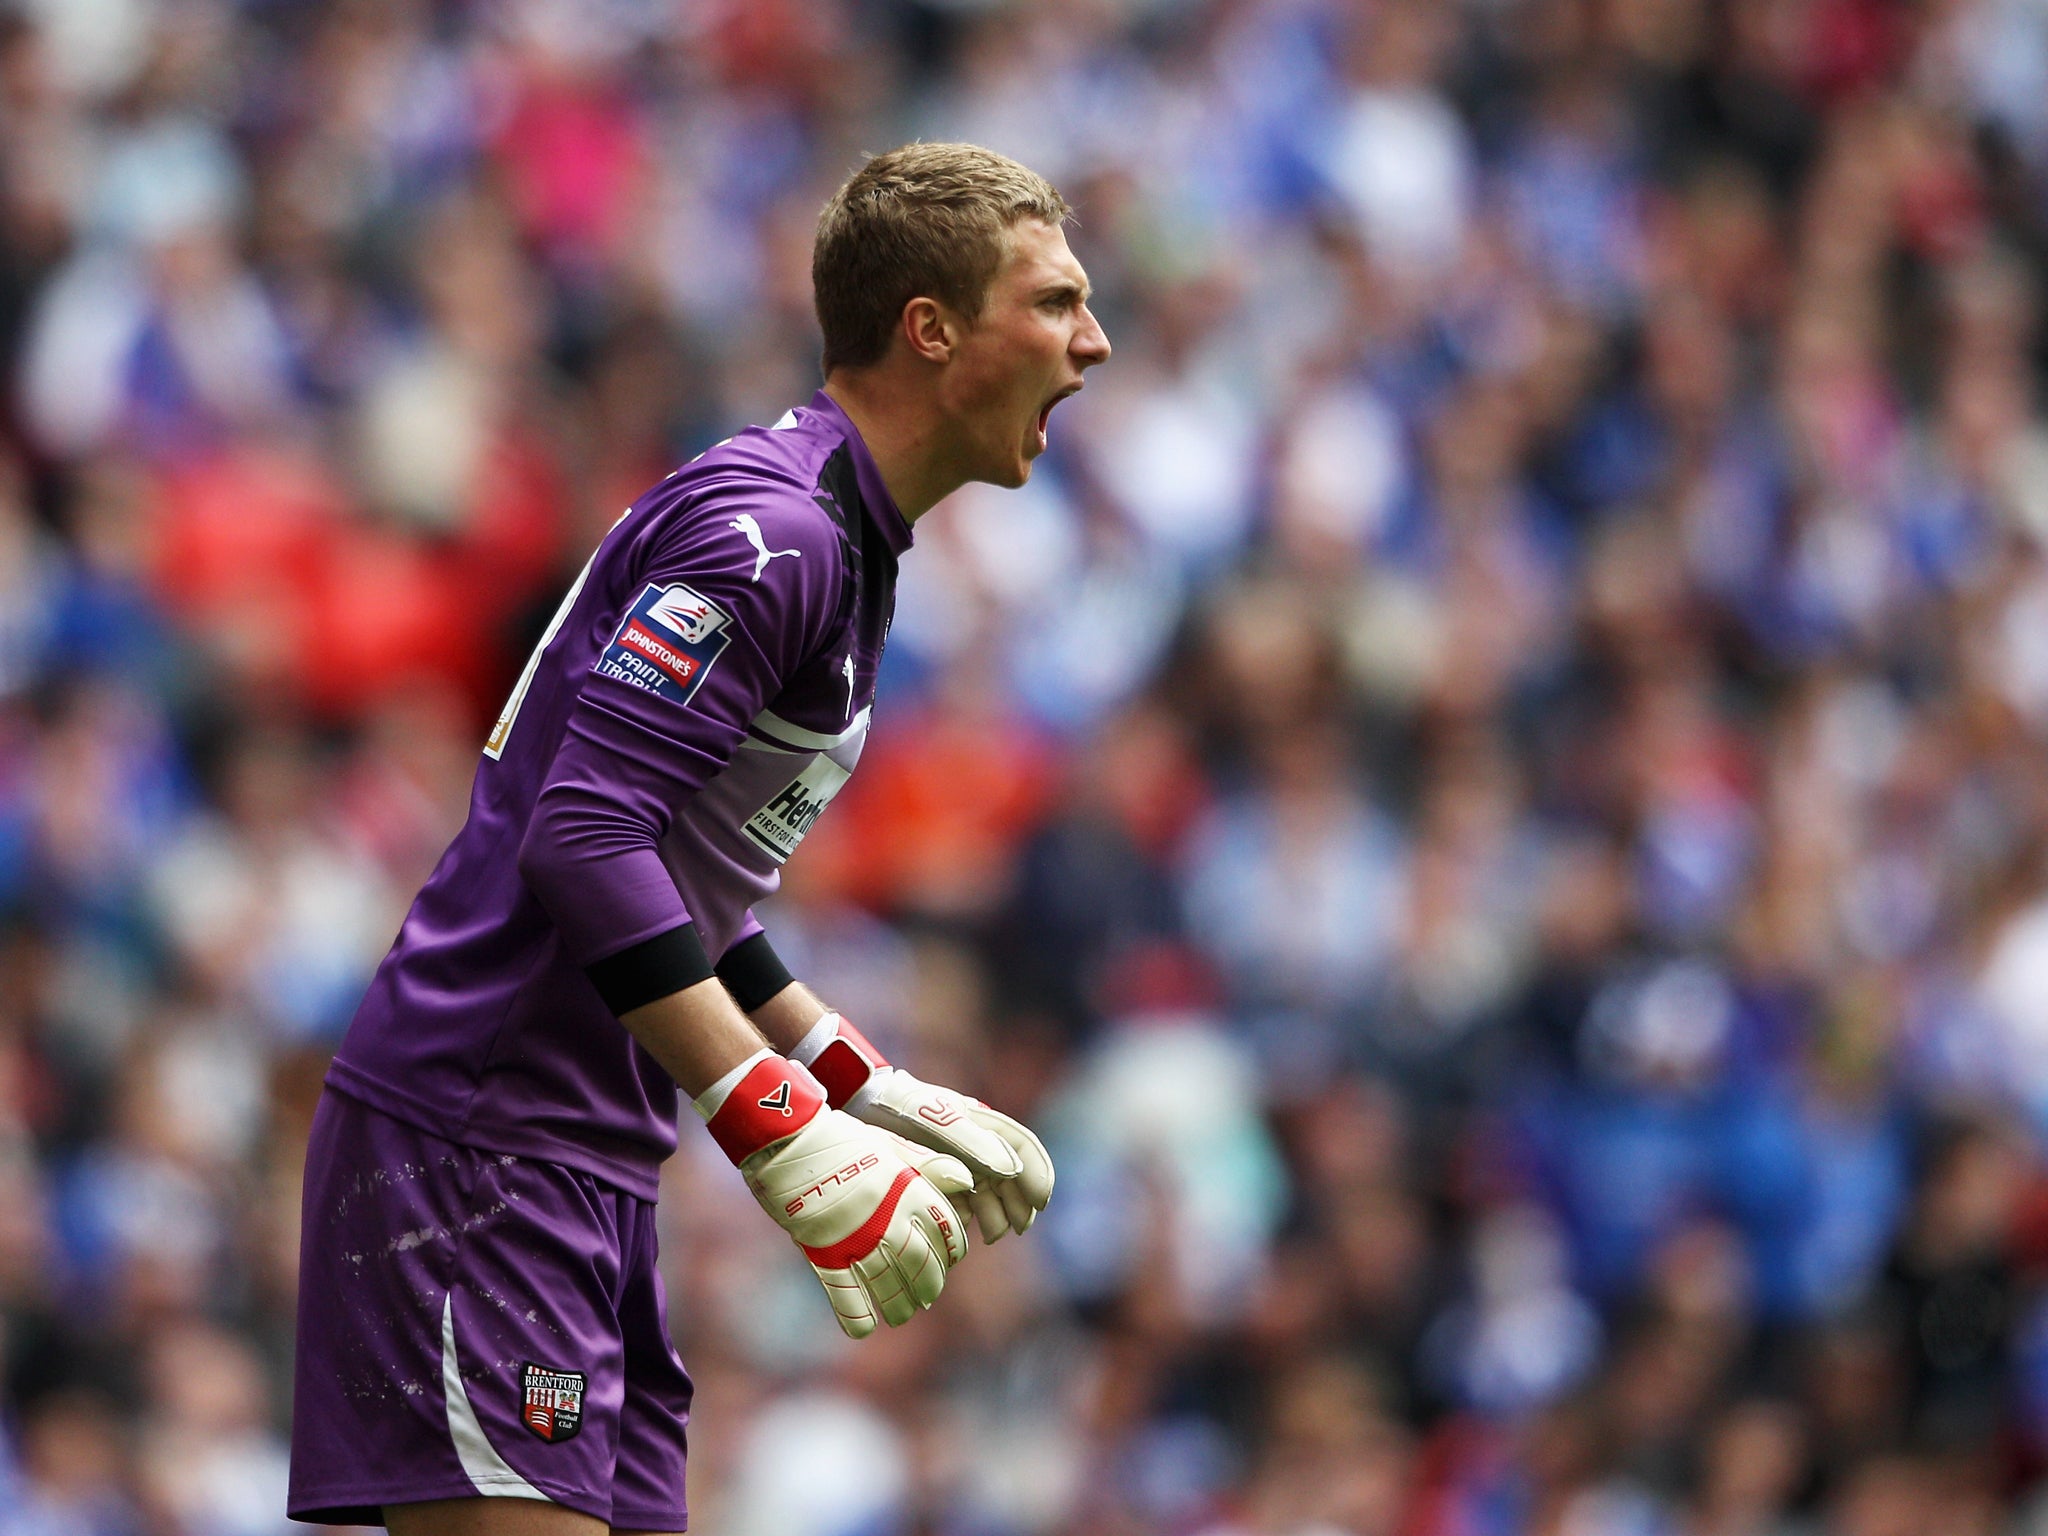 Goalkeeper Simon Moore has signed a four-year deal to move to Cardiff City